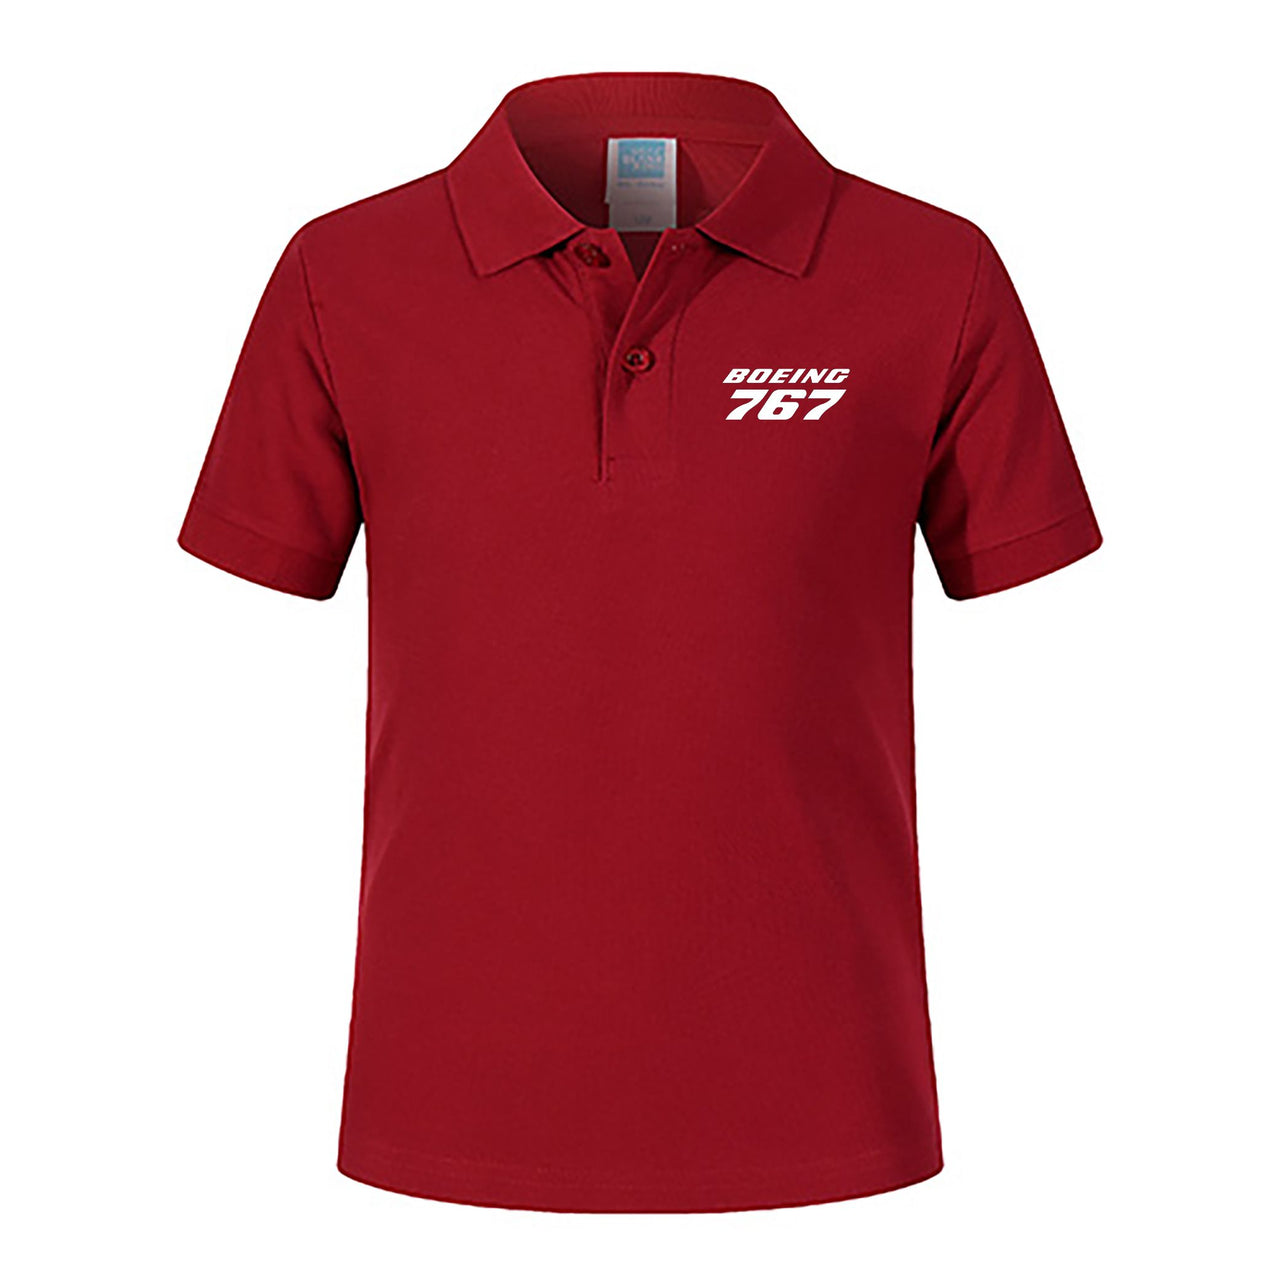 Boeing 767 & Text Designed Children Polo T-Shirts